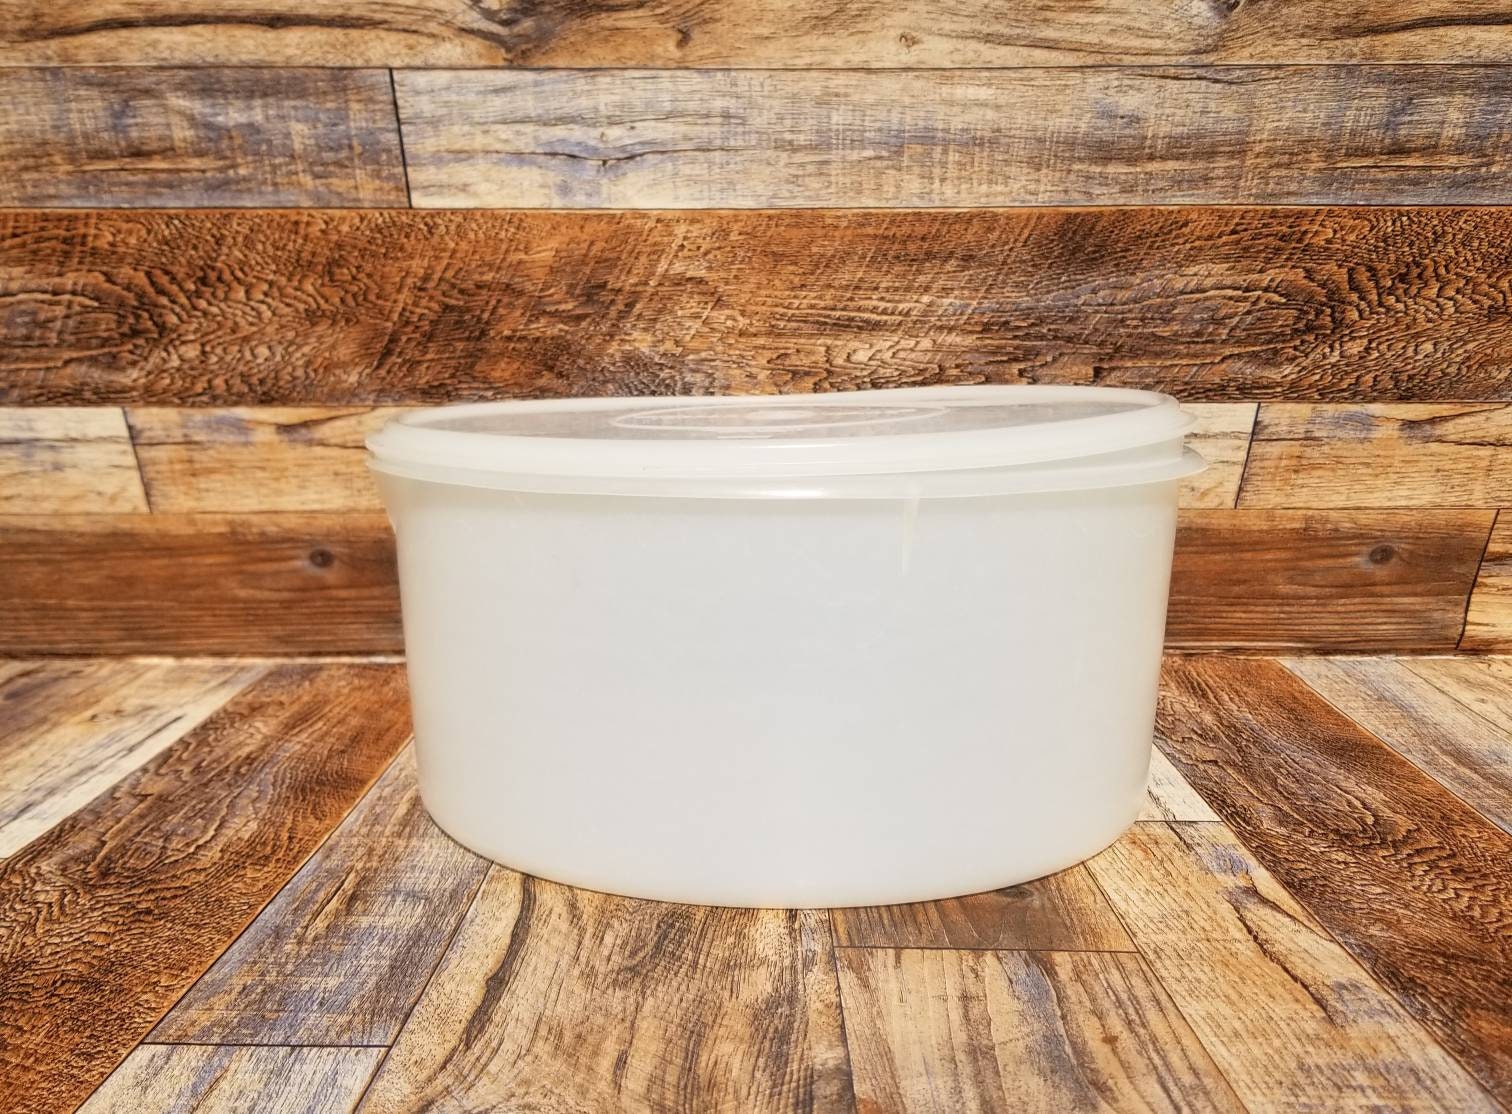 Vintage Tupperware Large Round Container 256 With Sheer Seal 